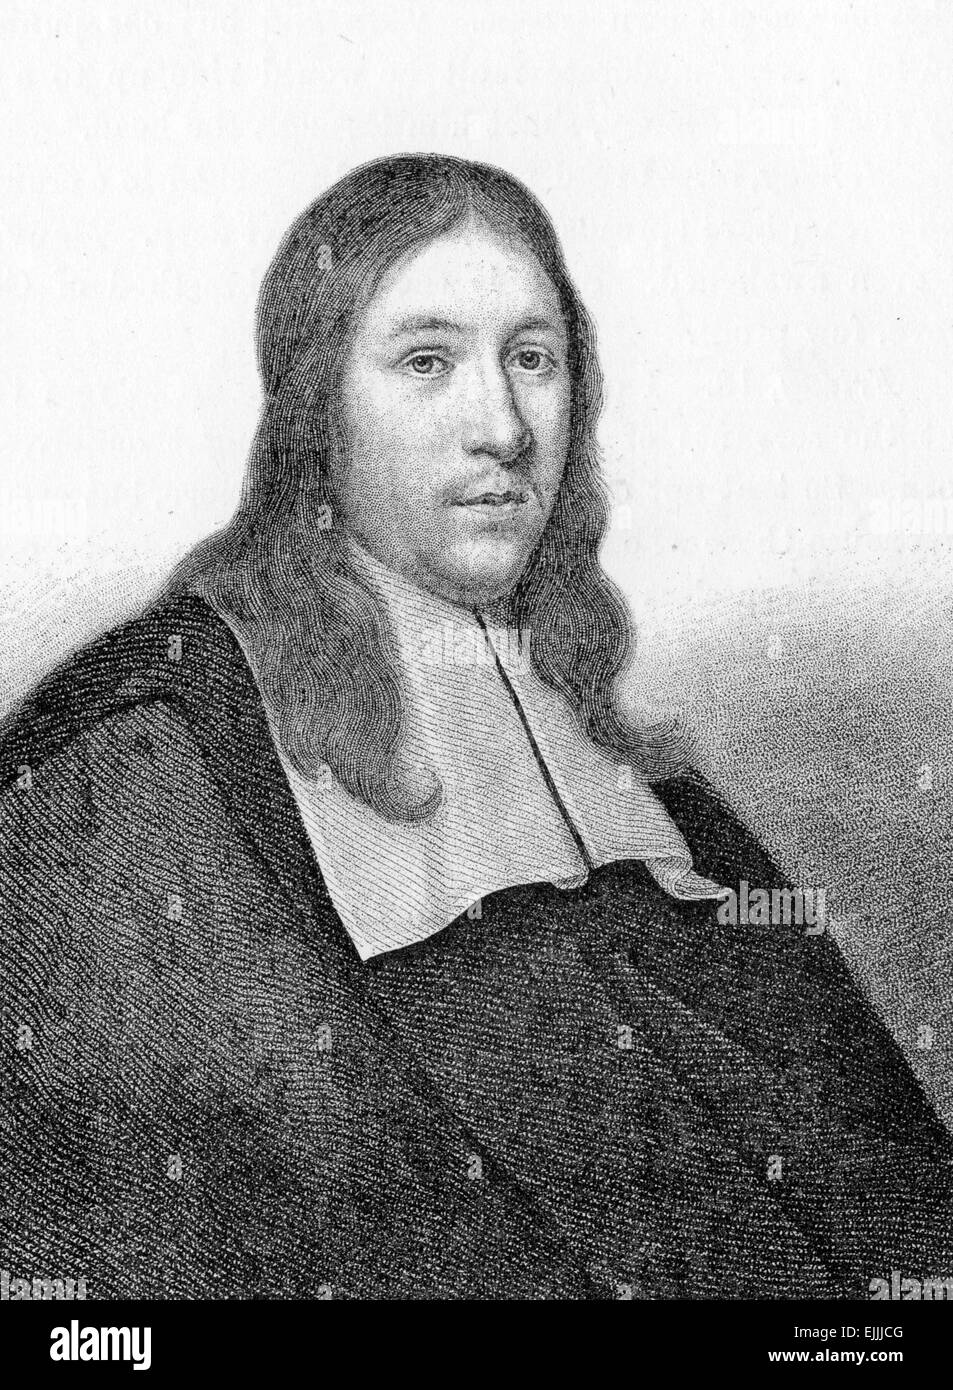 John Wesley, the grandfather of Methodist founder John Wesley, engraving from Selections from the Journal of John Wesley, 1891 Stock Photo